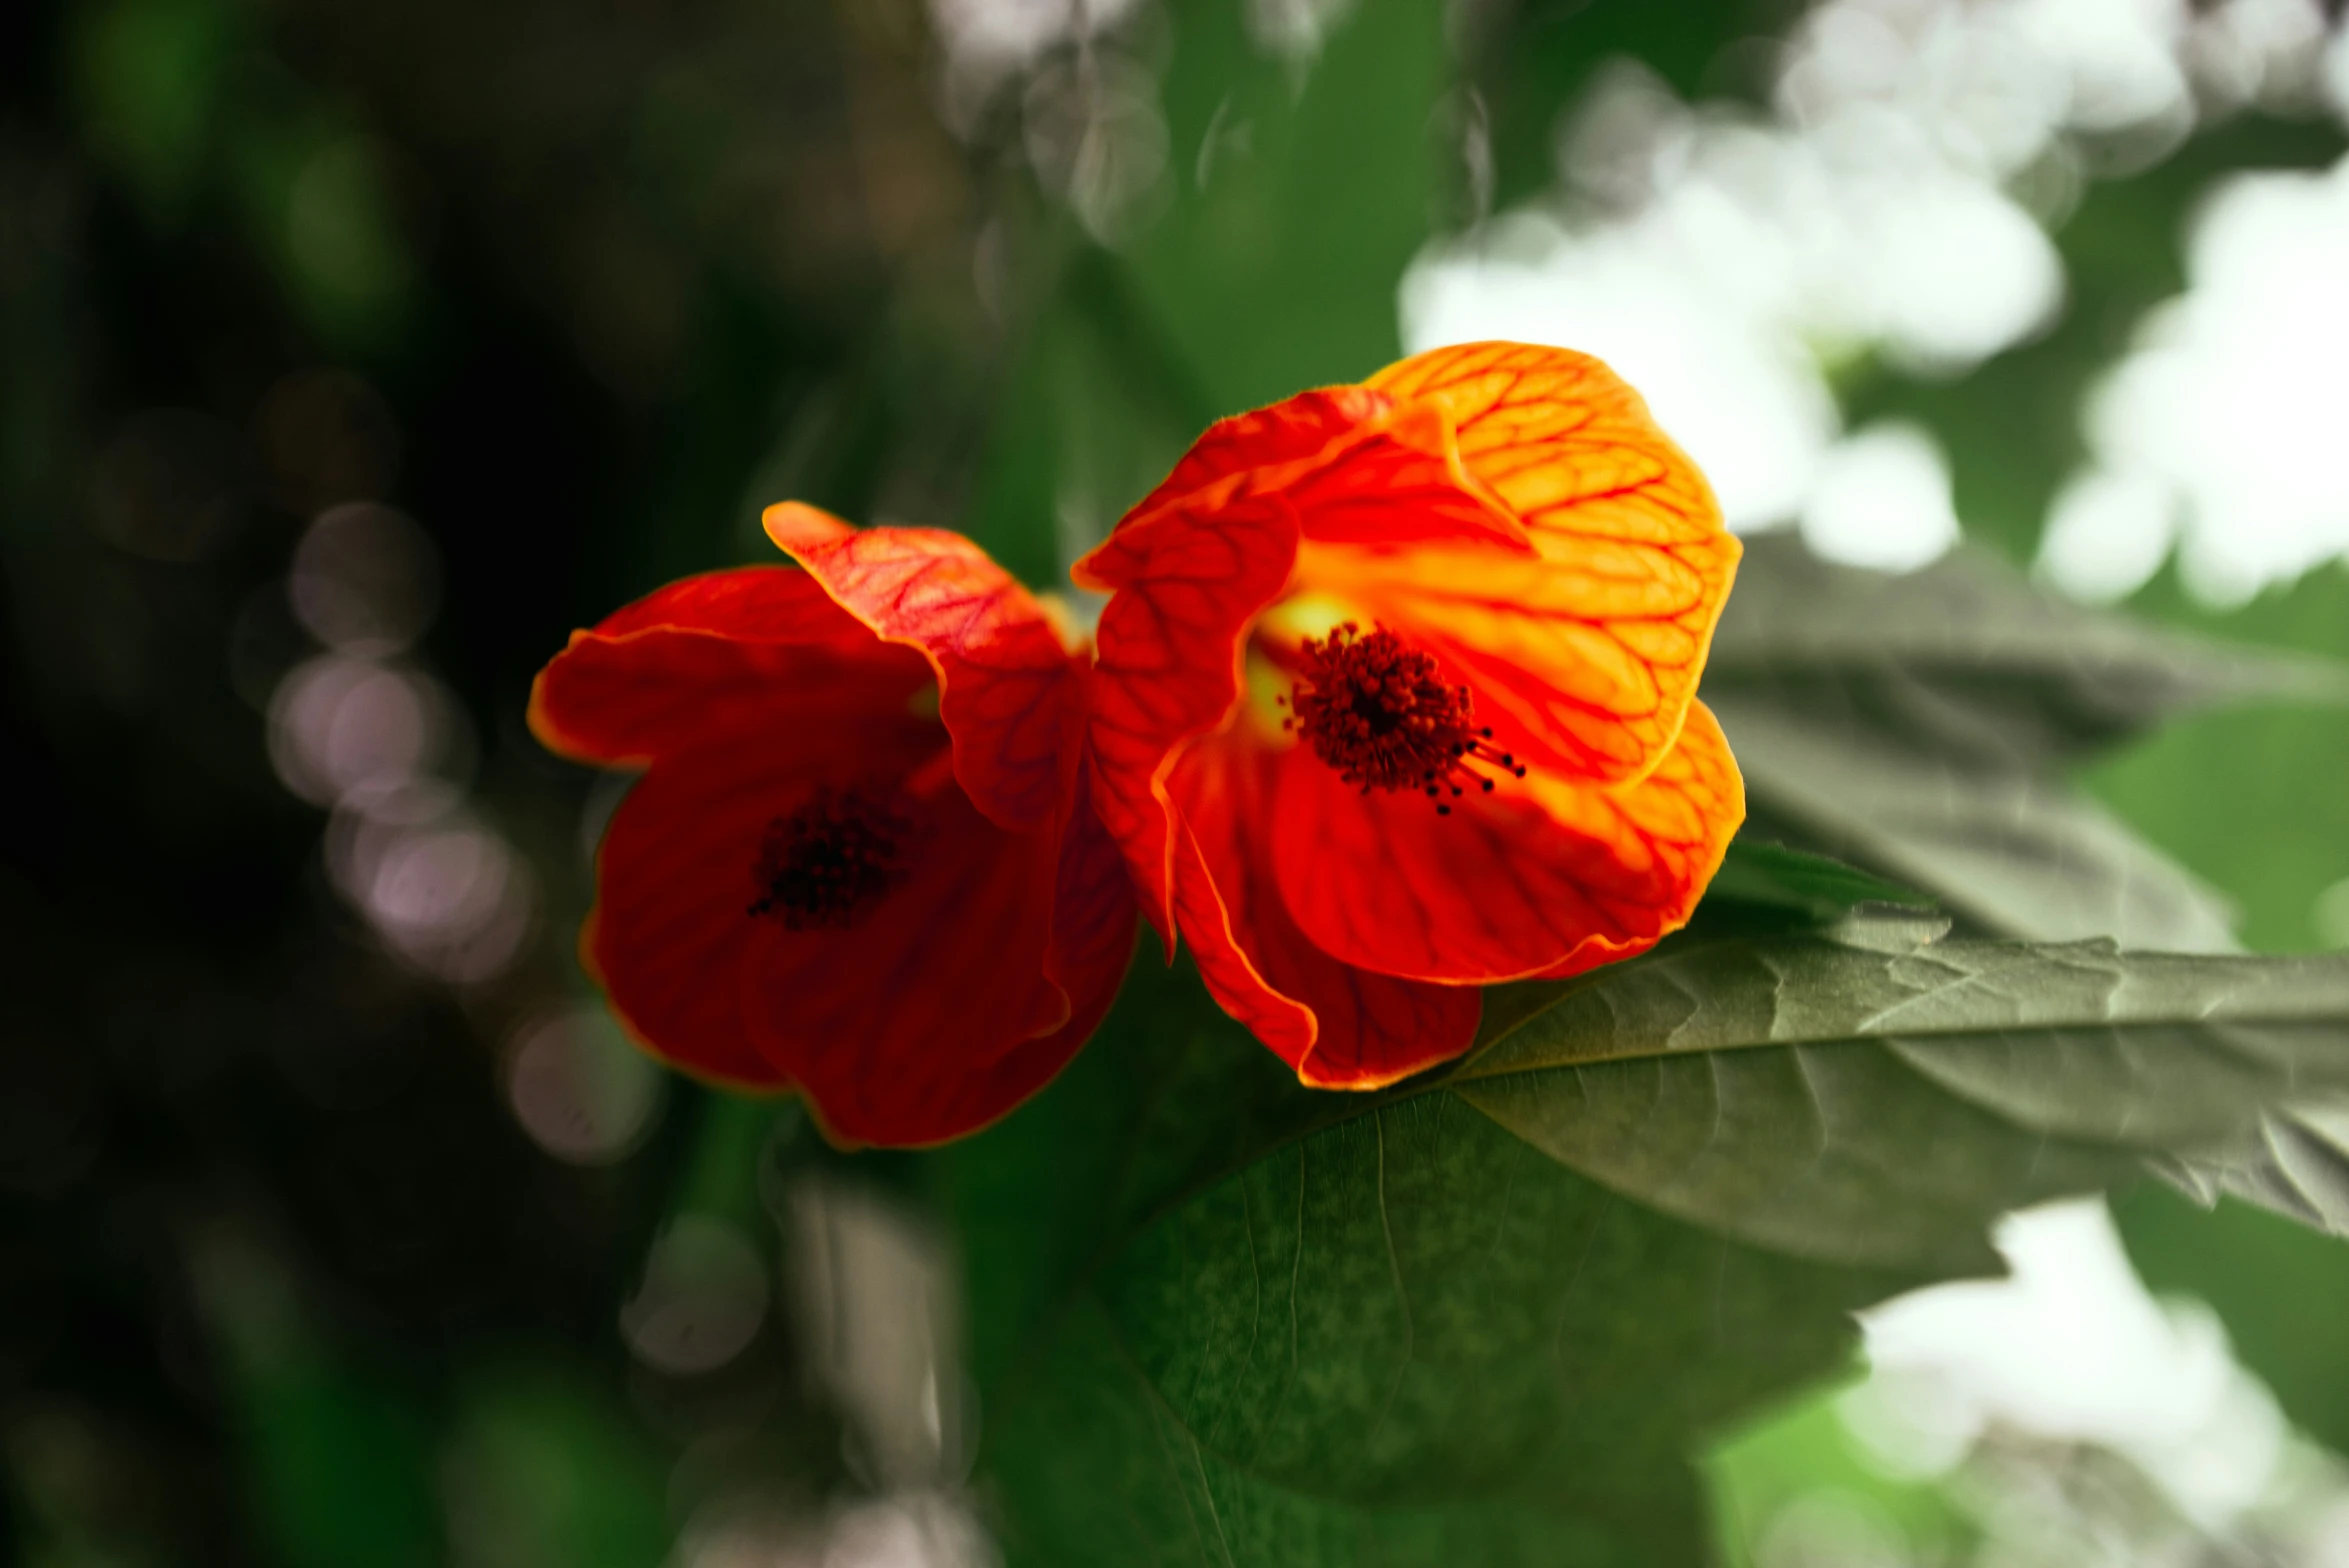 some orange flowers on top of green leaves